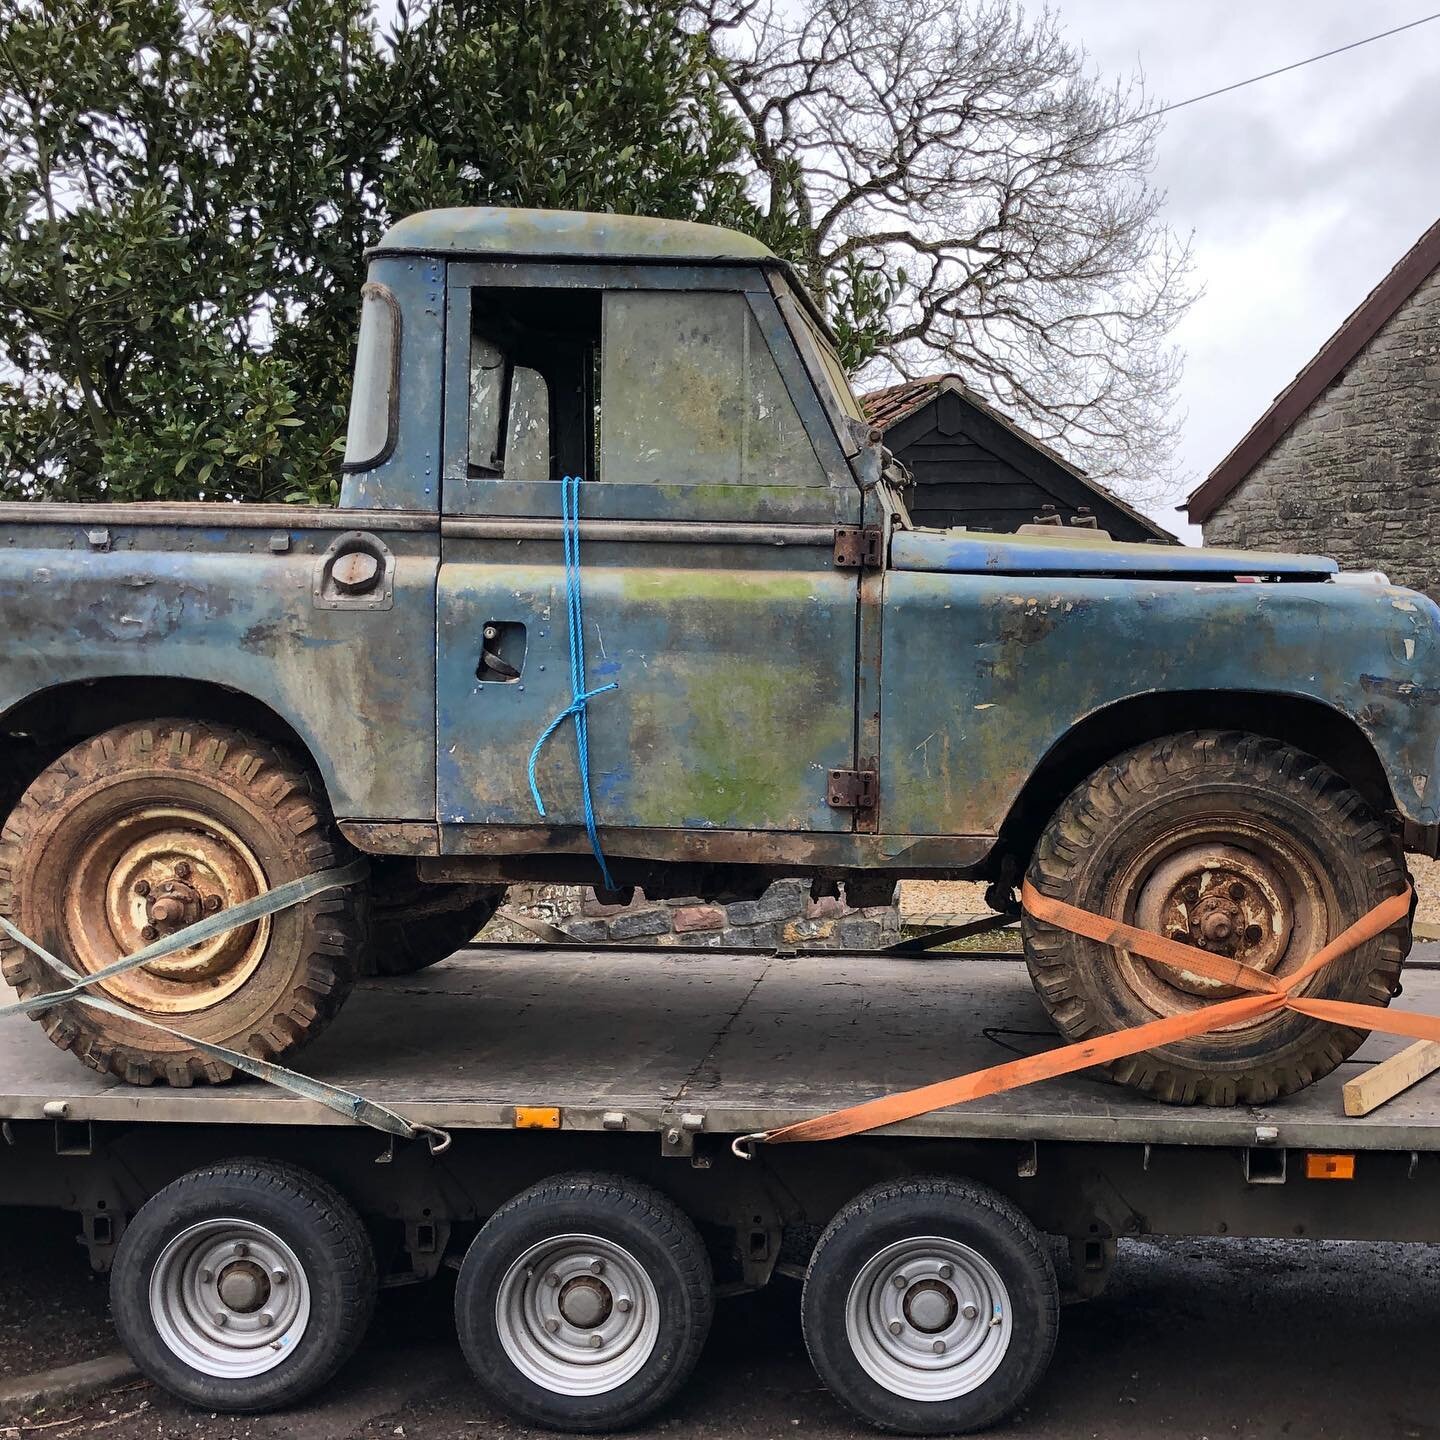 Barn Find - stored for 12 years. Follow us to see the tear down through to completion. All panels are off. Revealing a V8. 

@karcher_uk it&rsquo;s been working overtime cleaning the mud off.
@allisport_ltd a plan is being hatched!
@brembobrake ever 